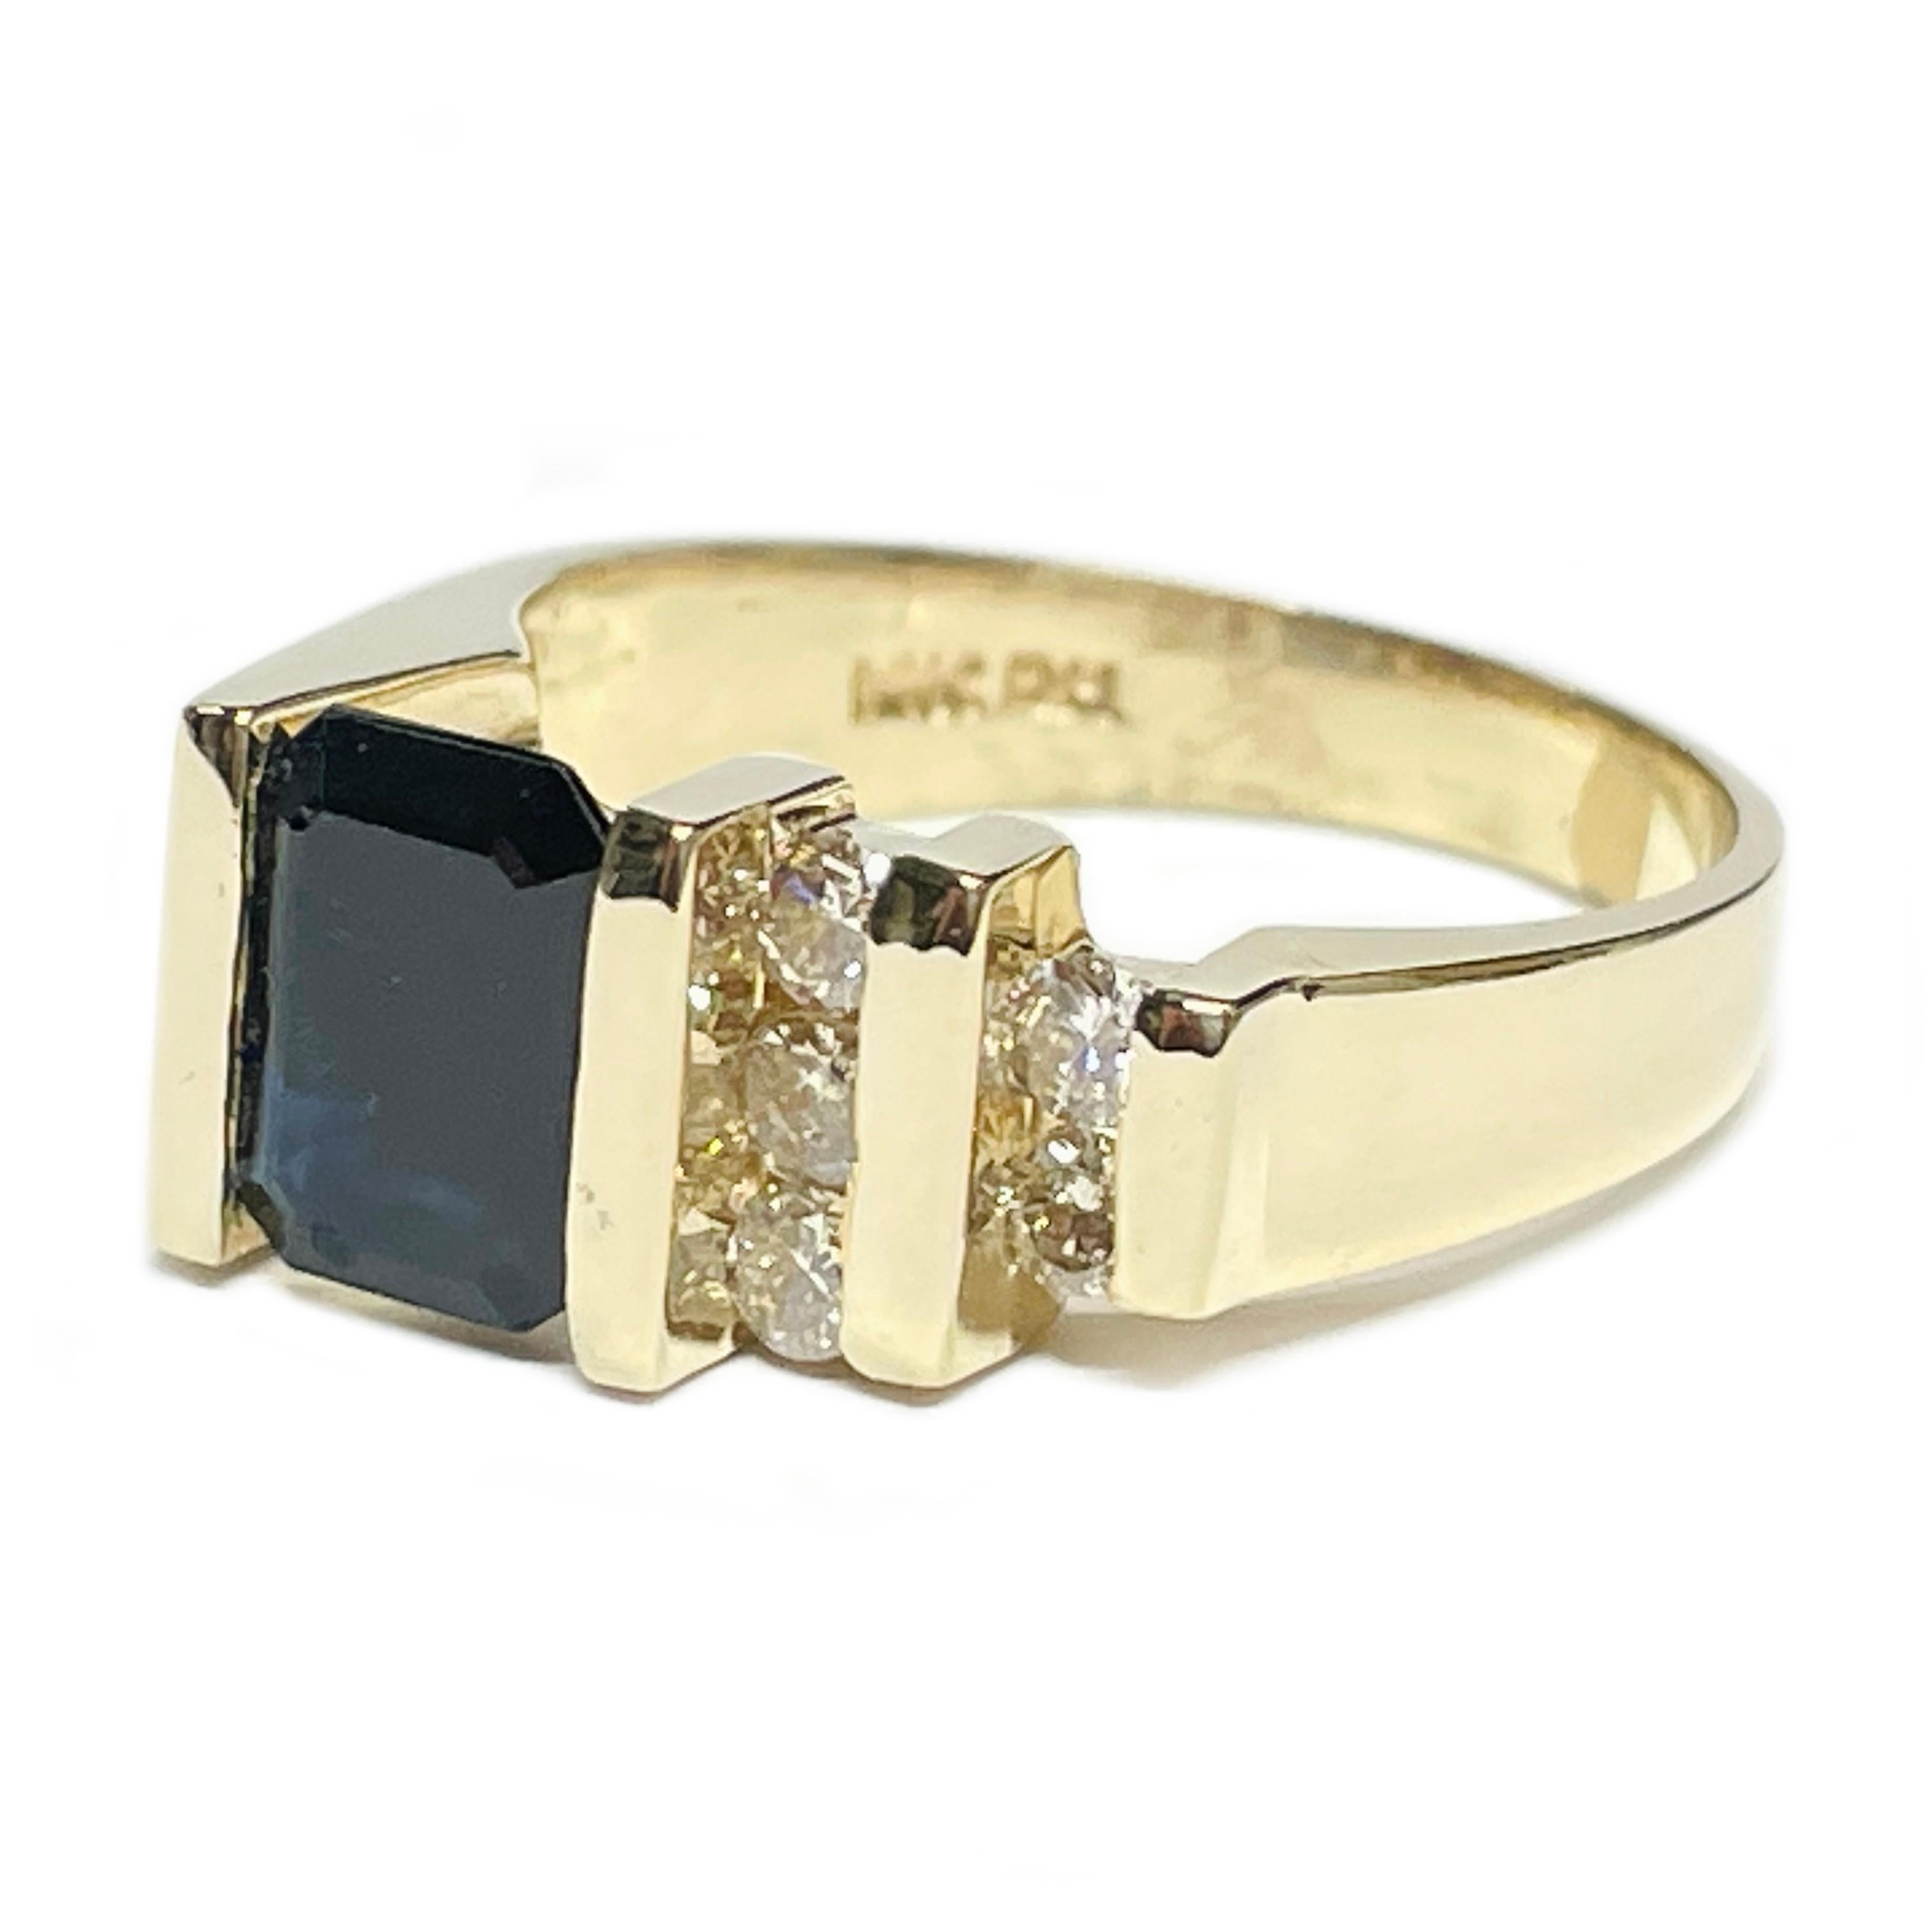 14 Karat Yellow Gold Dark Blue Sapphire Diamond Ring. The ring features a dark blue step-cut sapphire and channel-set diamonds on one side. The sapphire measures 8 x 6mm and is dark blue in color with a carat weight of 1.90ct. There are five round